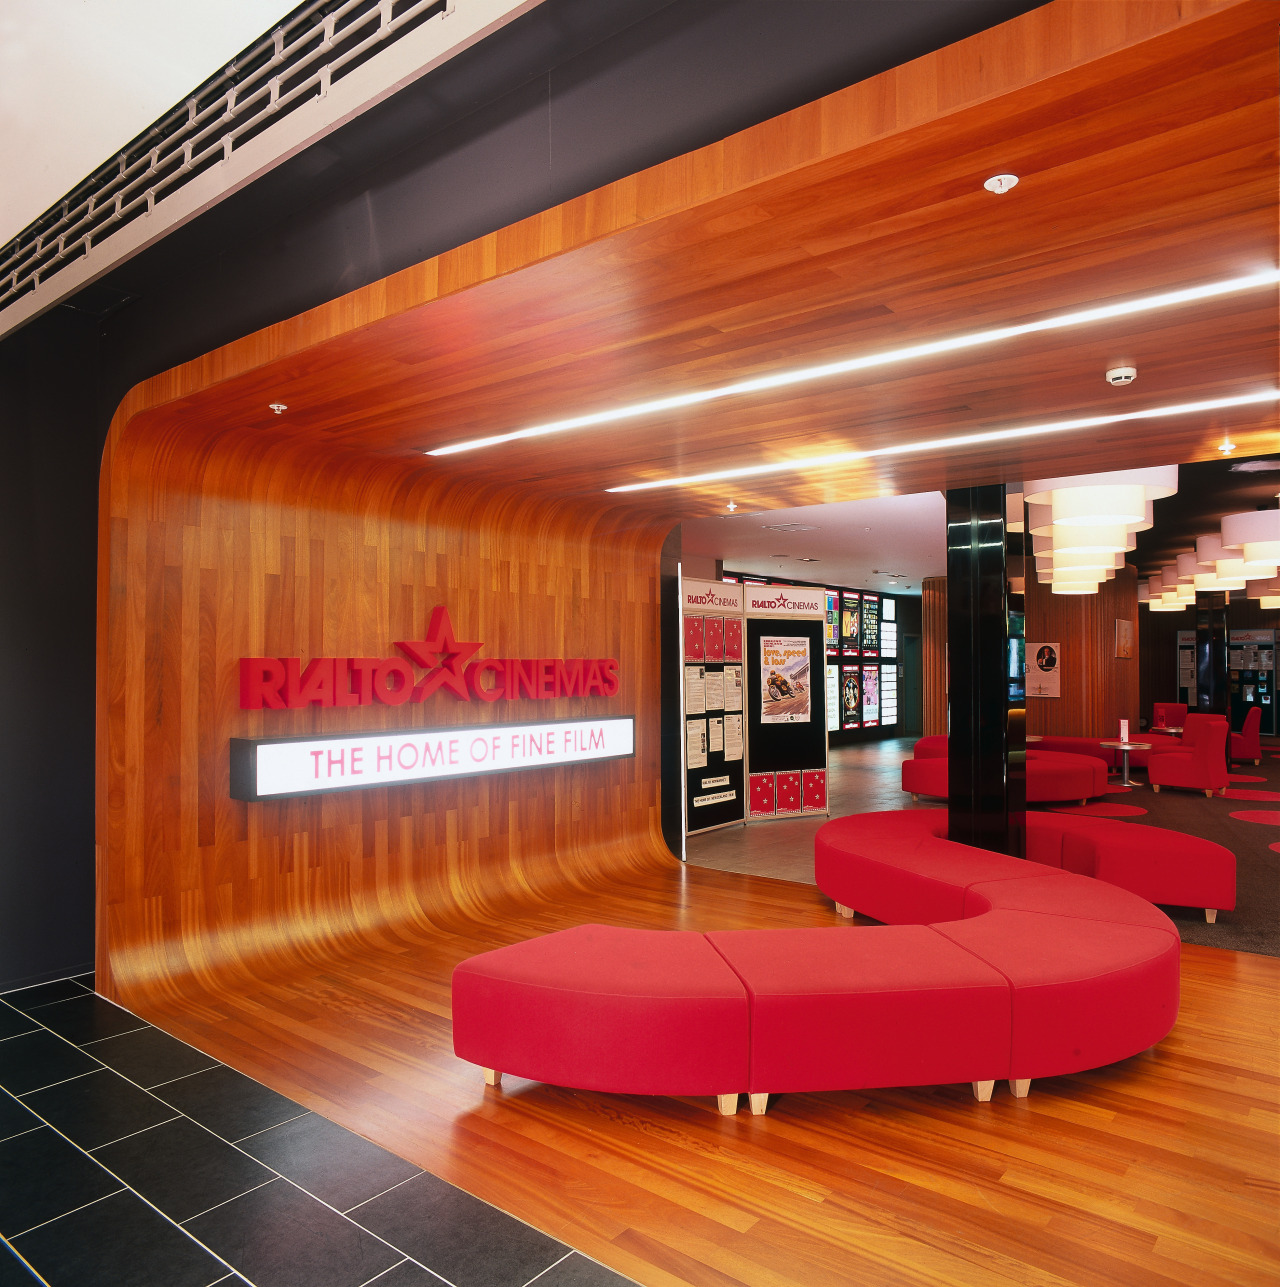 Rialto Cinema lobby with wood panelling and flooring, architecture, ceiling, flooring, interior design, lobby, wood, red